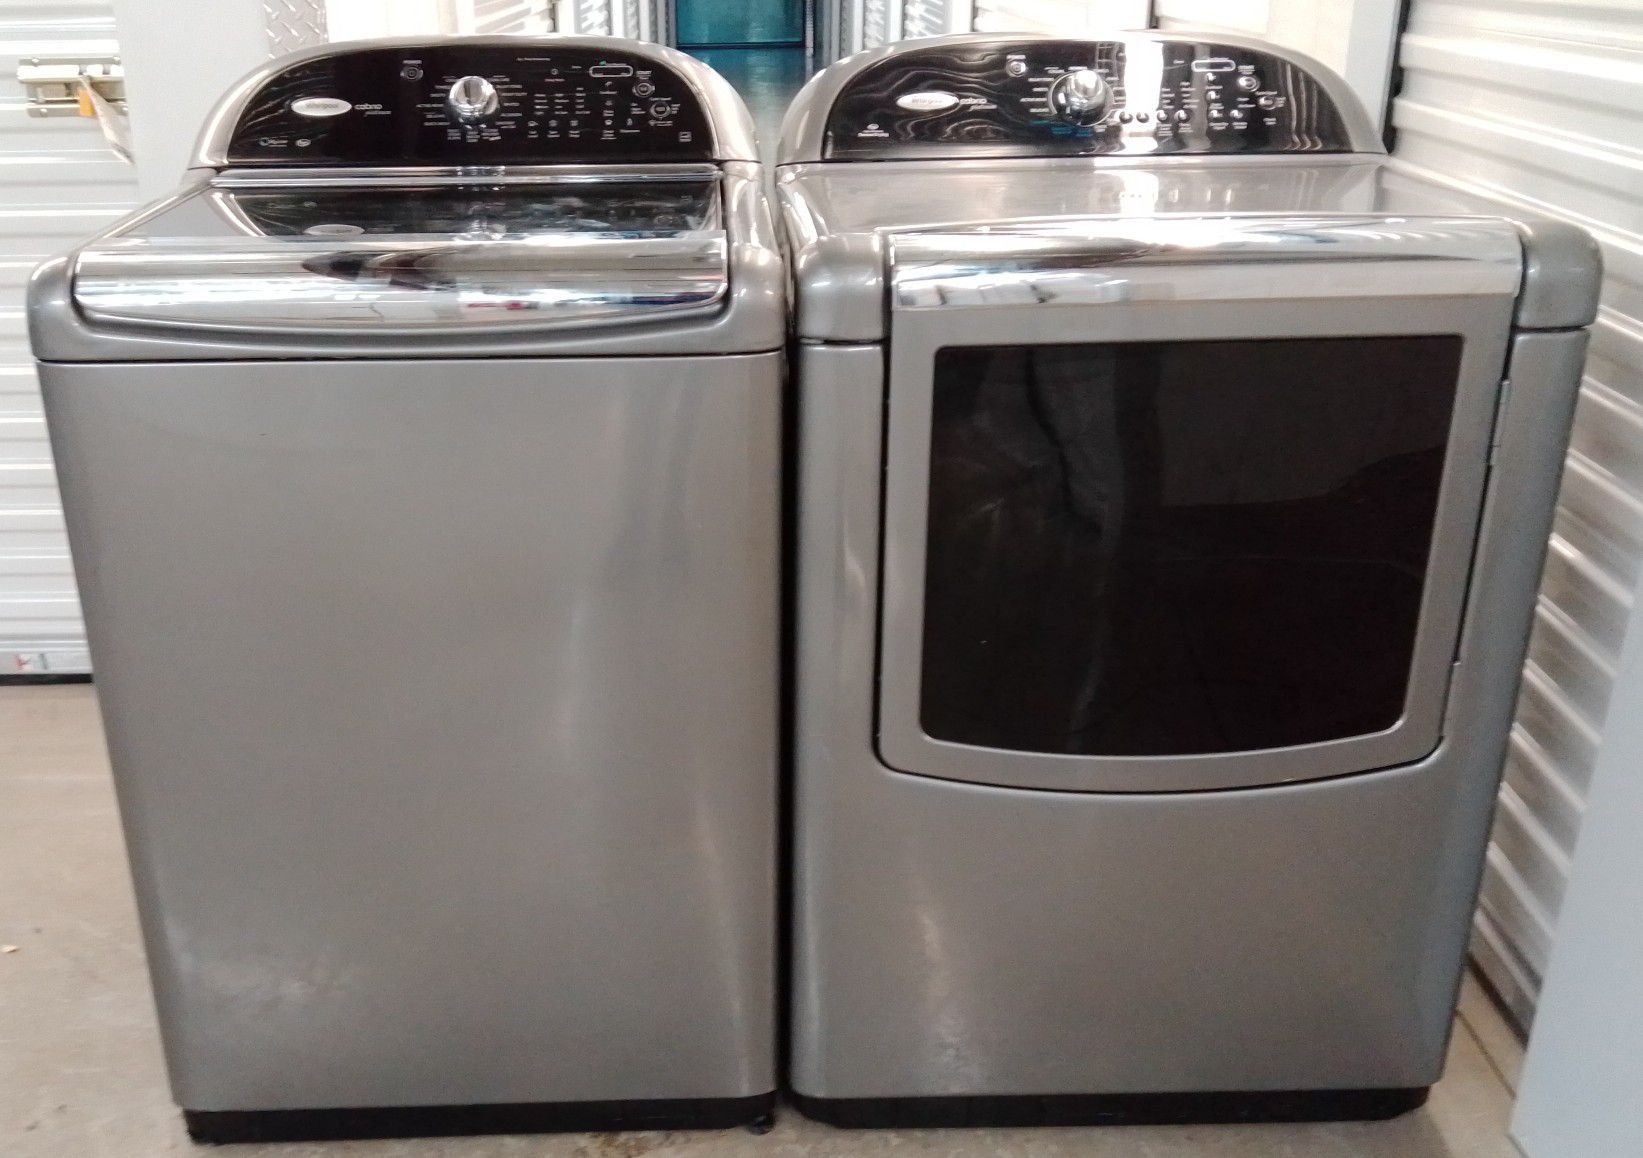 WHIRLPOOL CABRIO PLATINUM HE2 LOW STEAM HIGH EFFICIENCY WASHER AND DRYER ON SALE WITH WARRANTY AND DELIVERY AVAILABLE